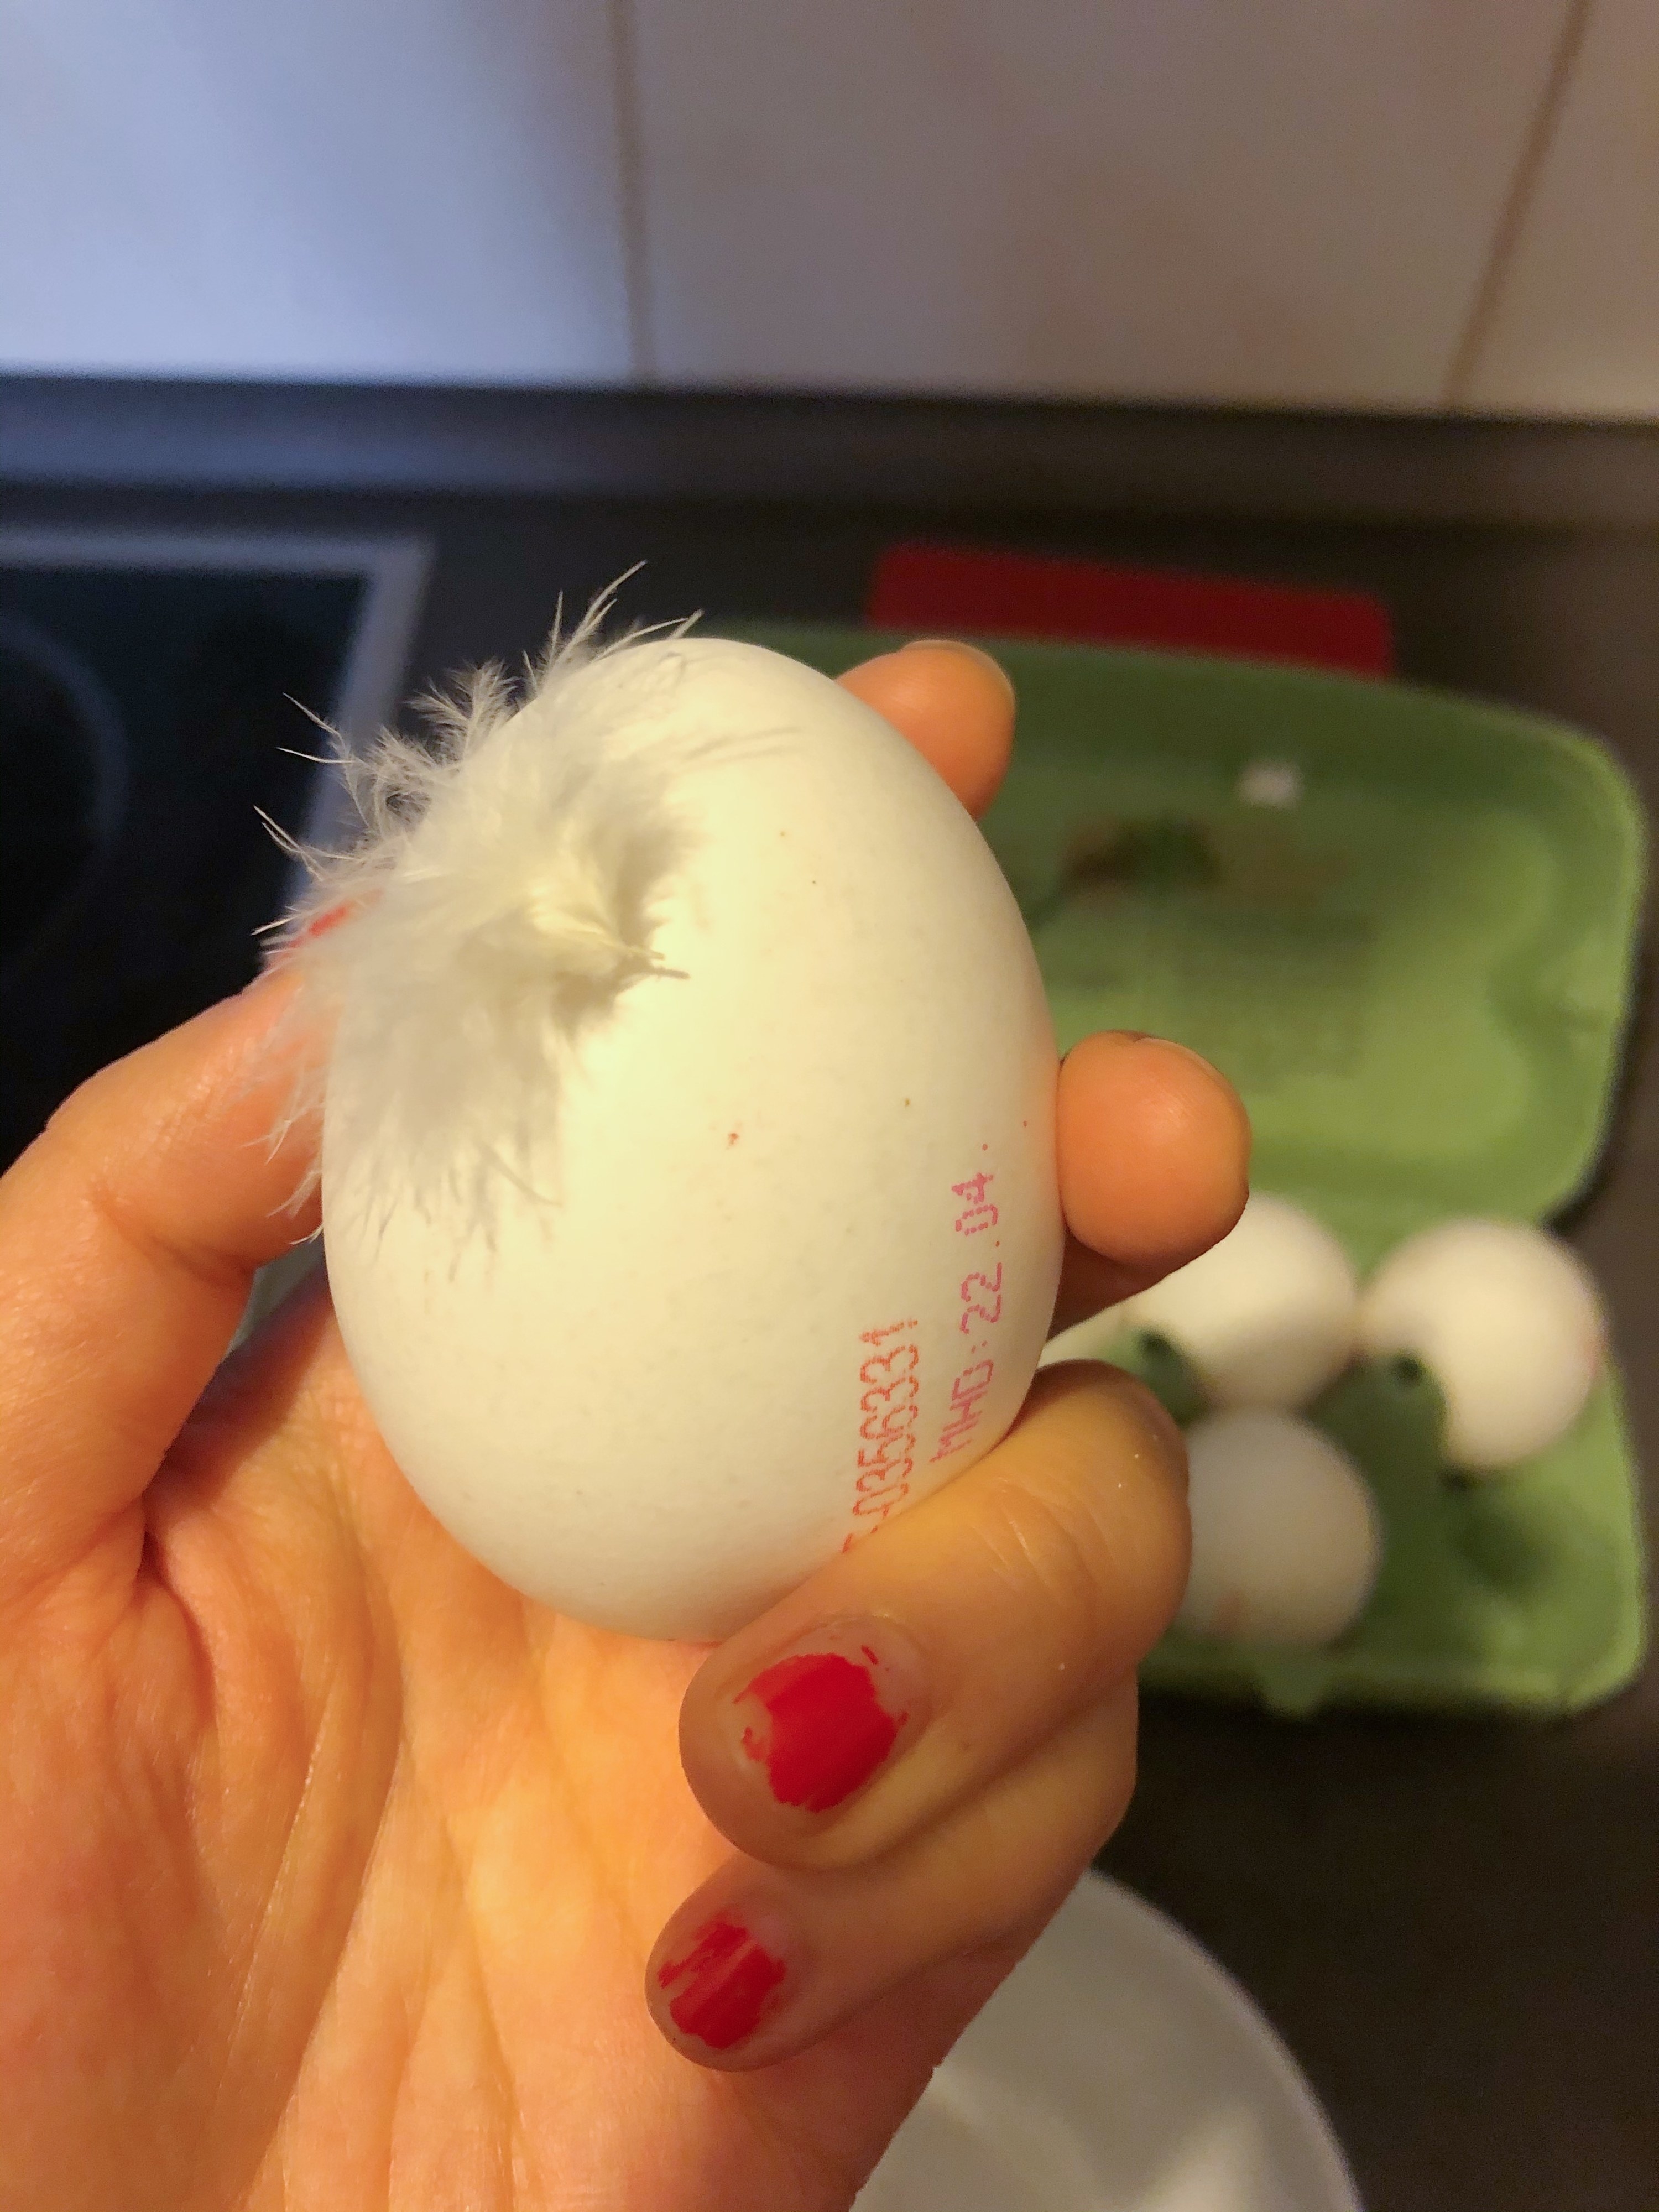 Carton of eggs — with a stray feather visible — at German supermarket.